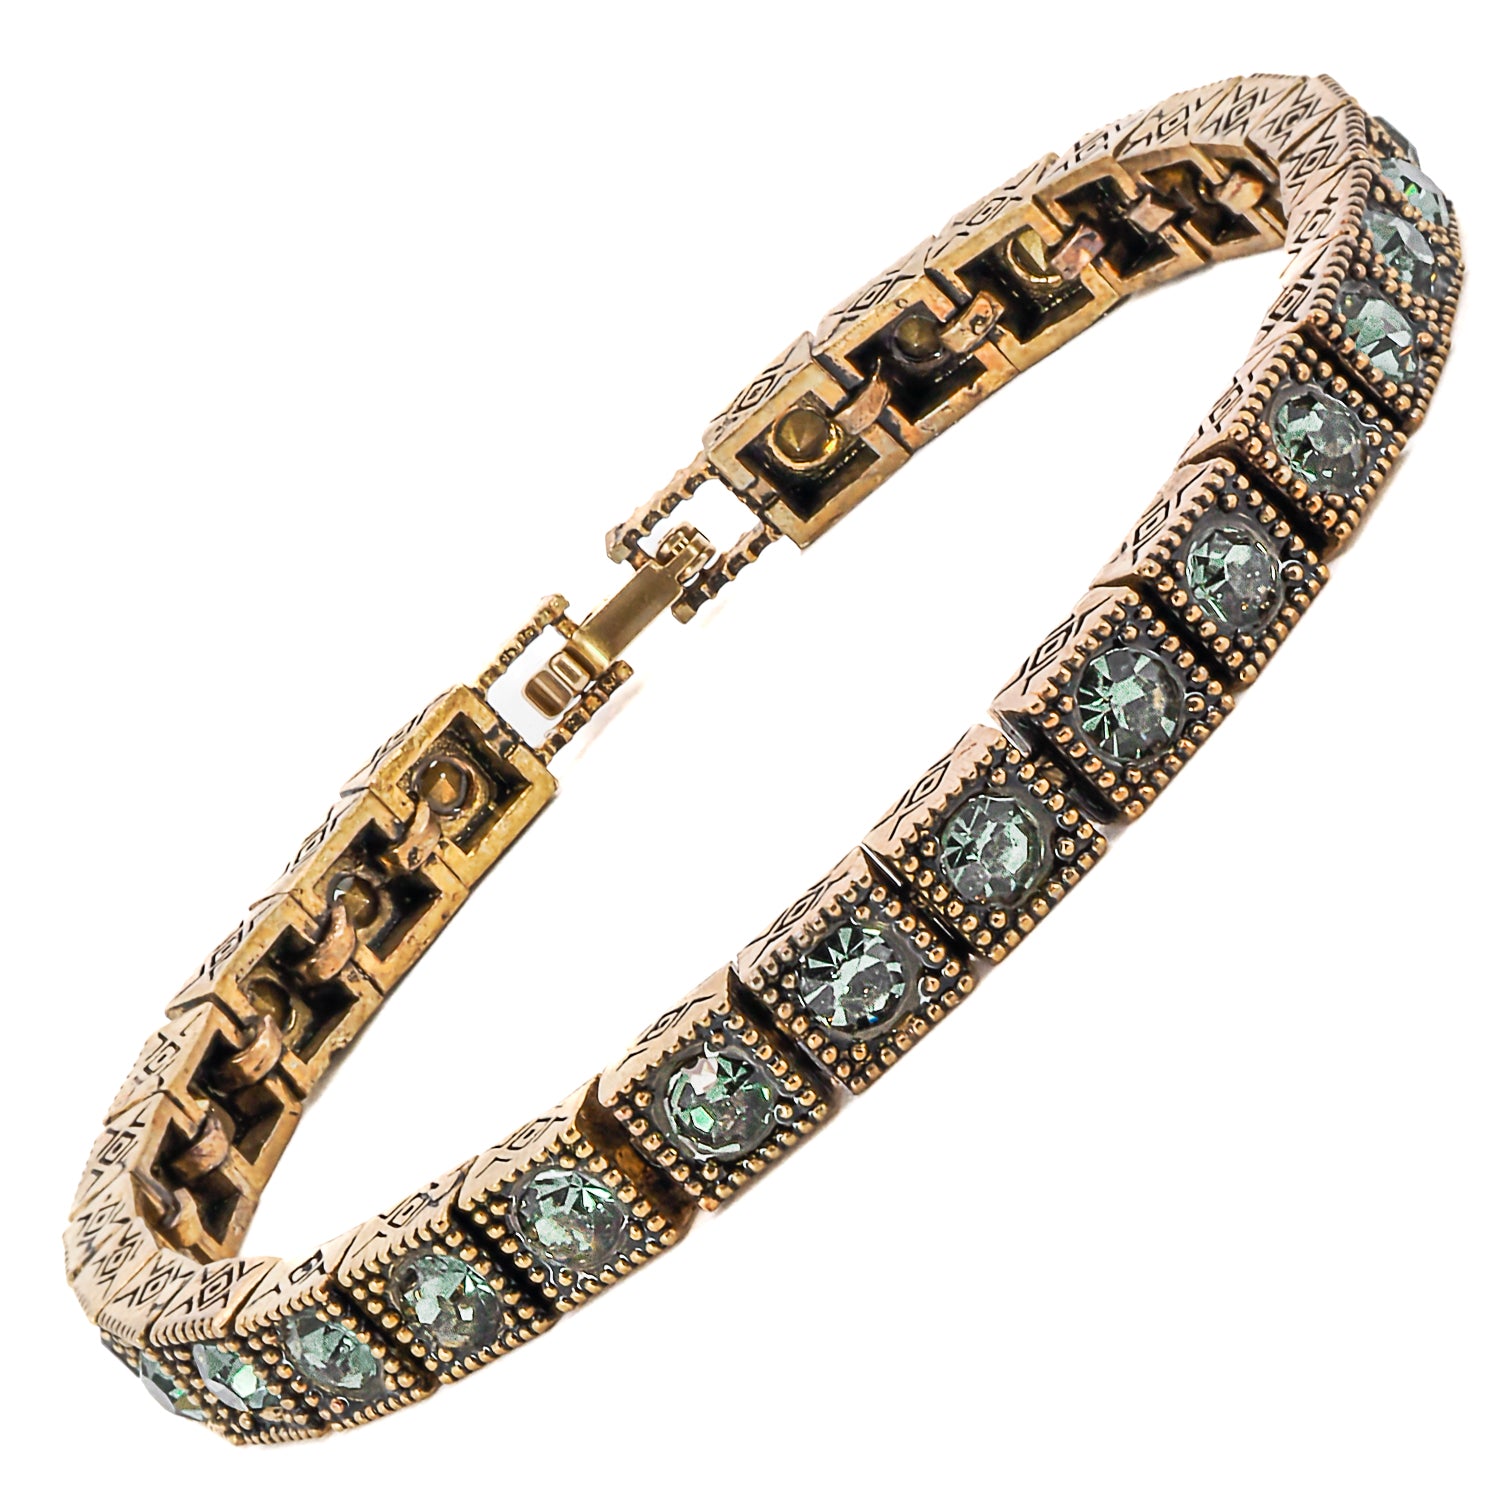 A close-up of the high-quality bronze bracelet featuring exquisite green Swarovski crystals.